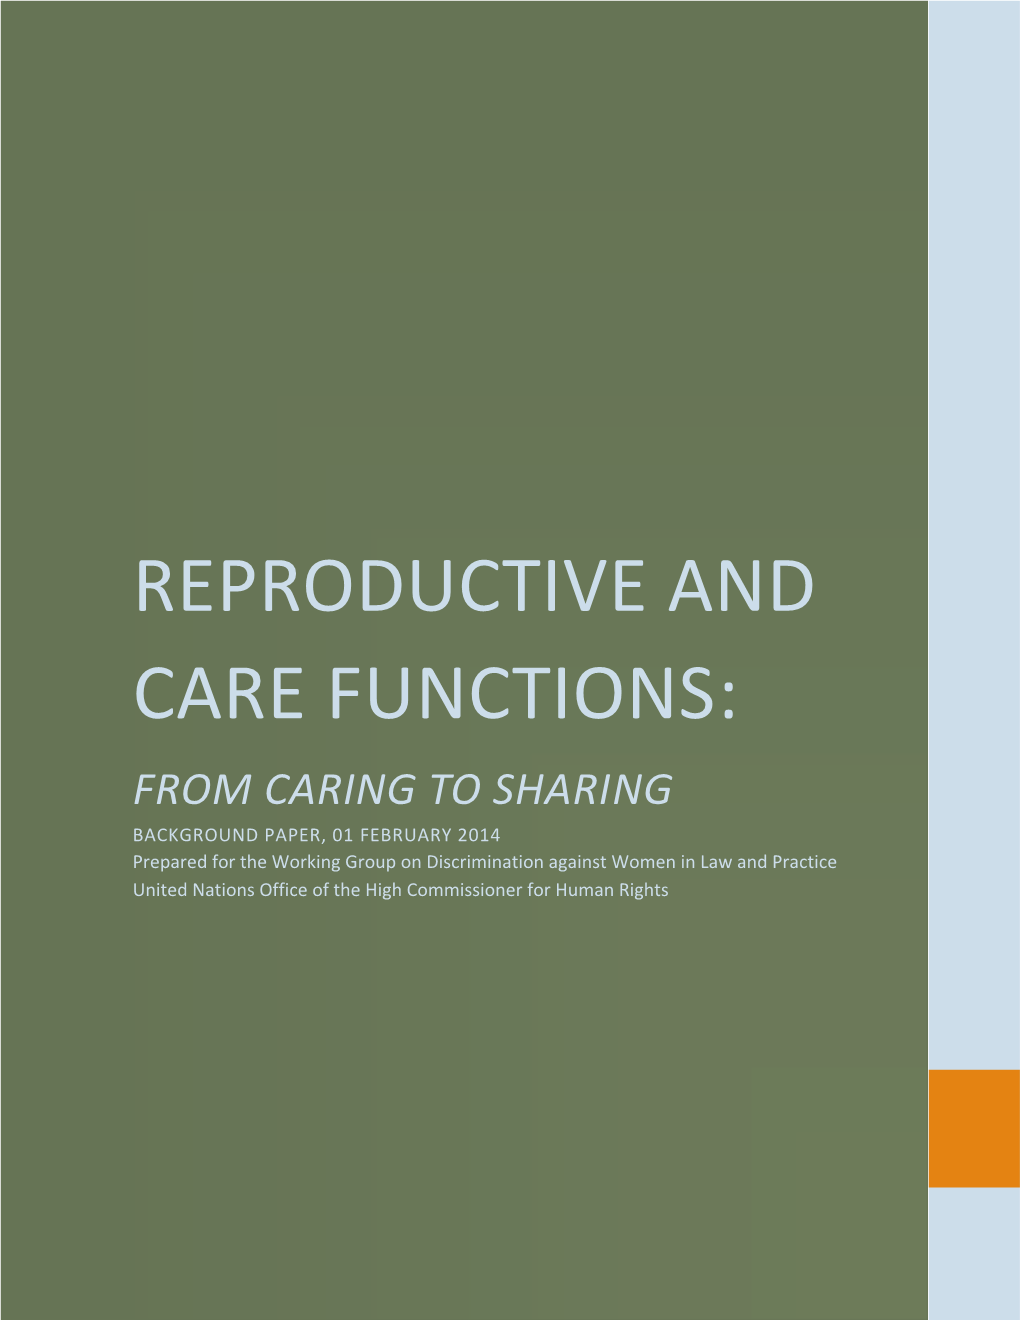 Reproductive and Care Functions Background Paper, 01 February 2014